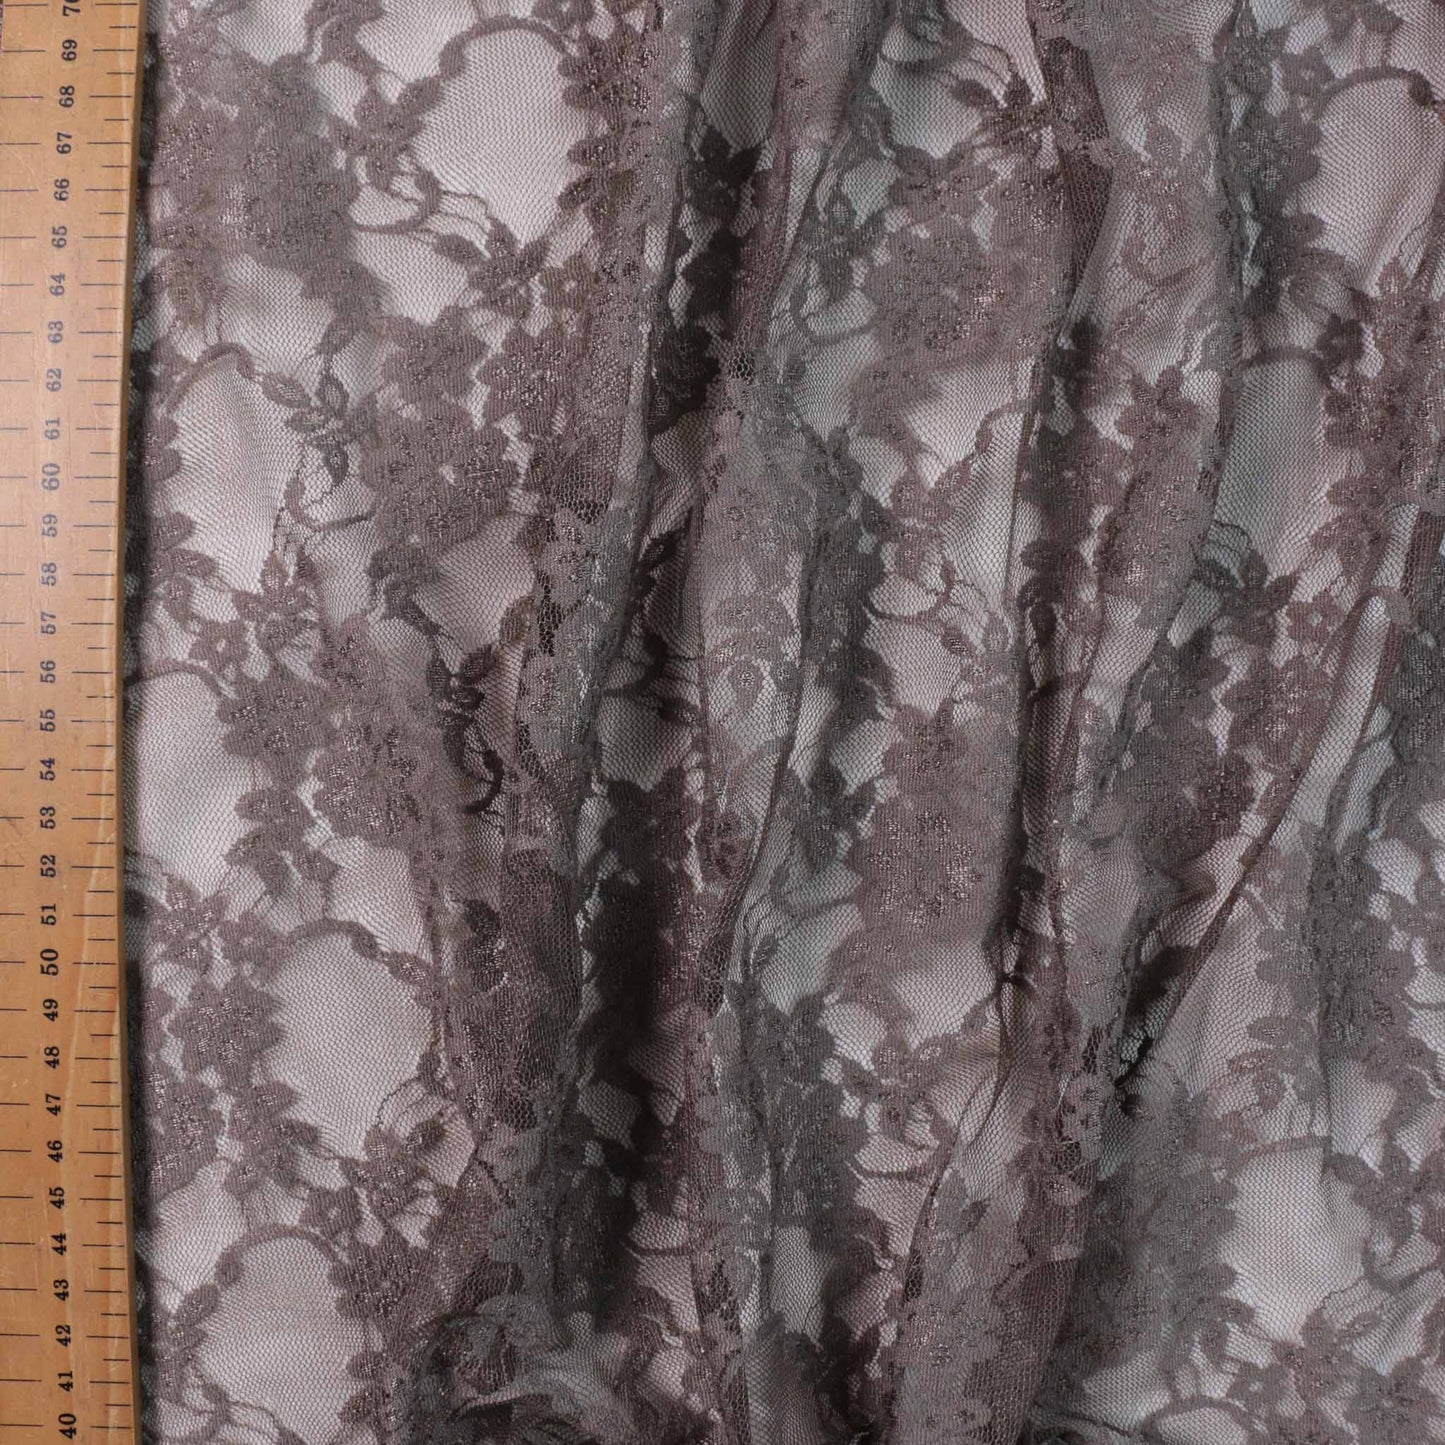 metre beige floral lace fabric for dressmaking